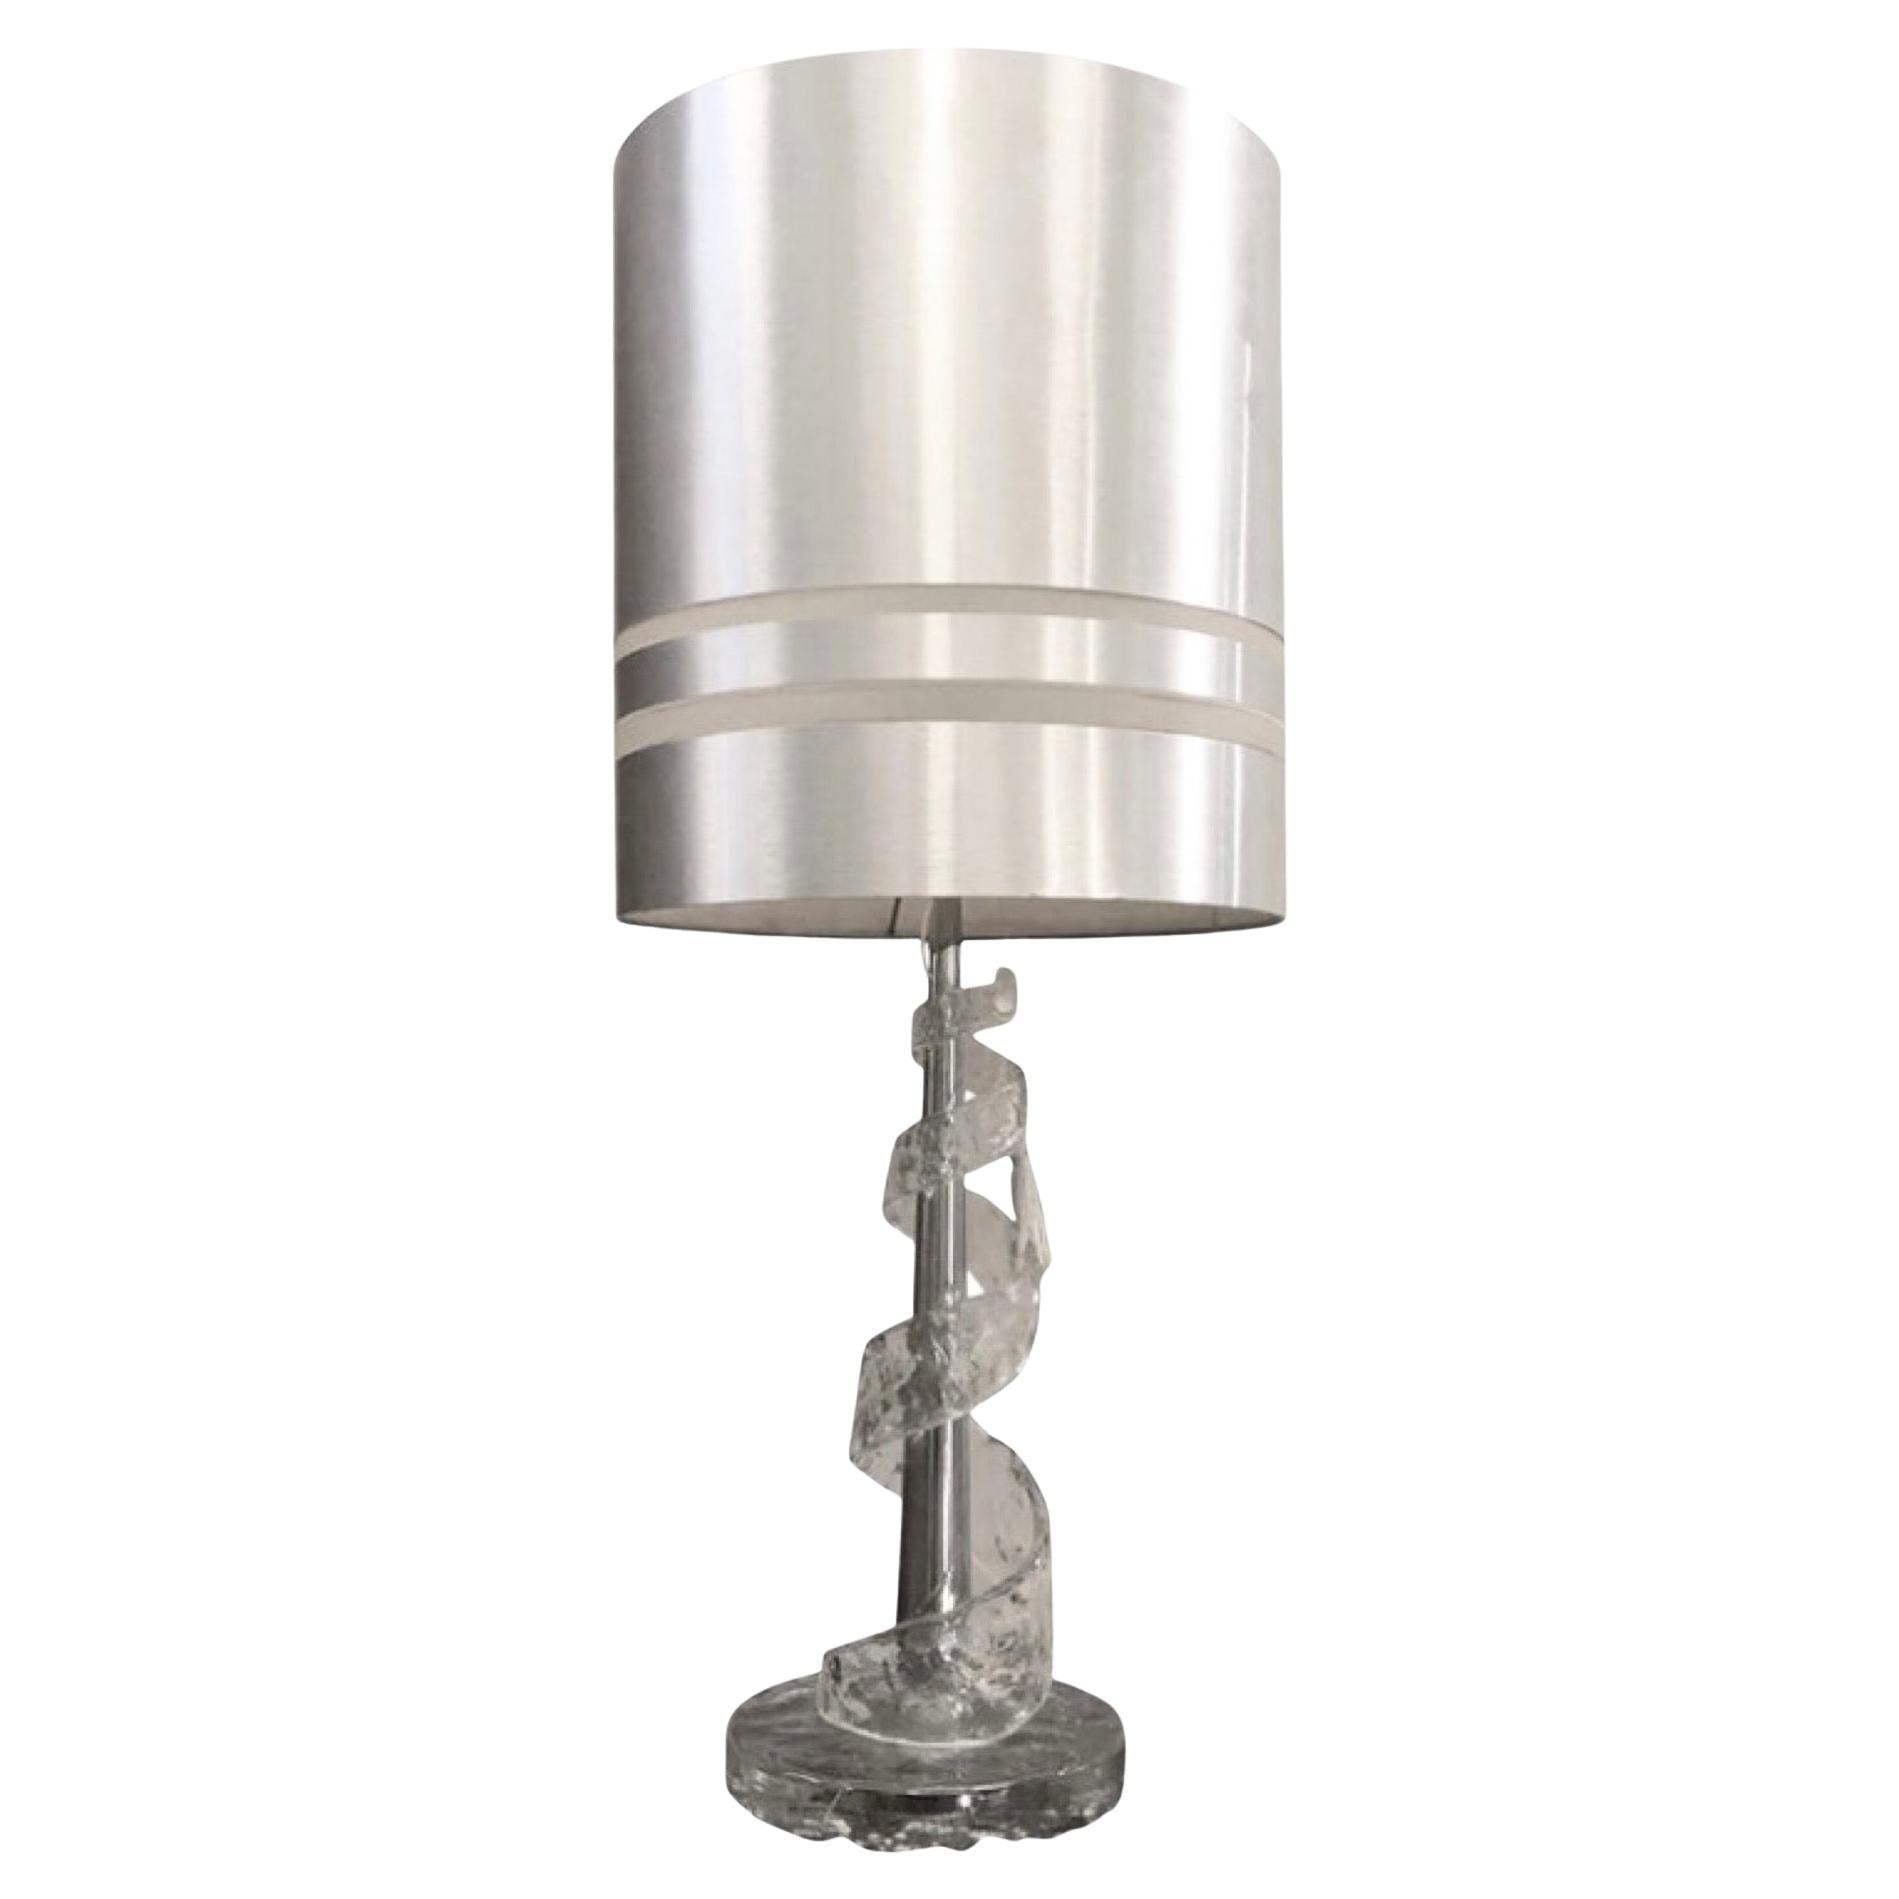 1970 Amazing Angelo Brotto Spiral Transparent Murano Glass Table Lamp